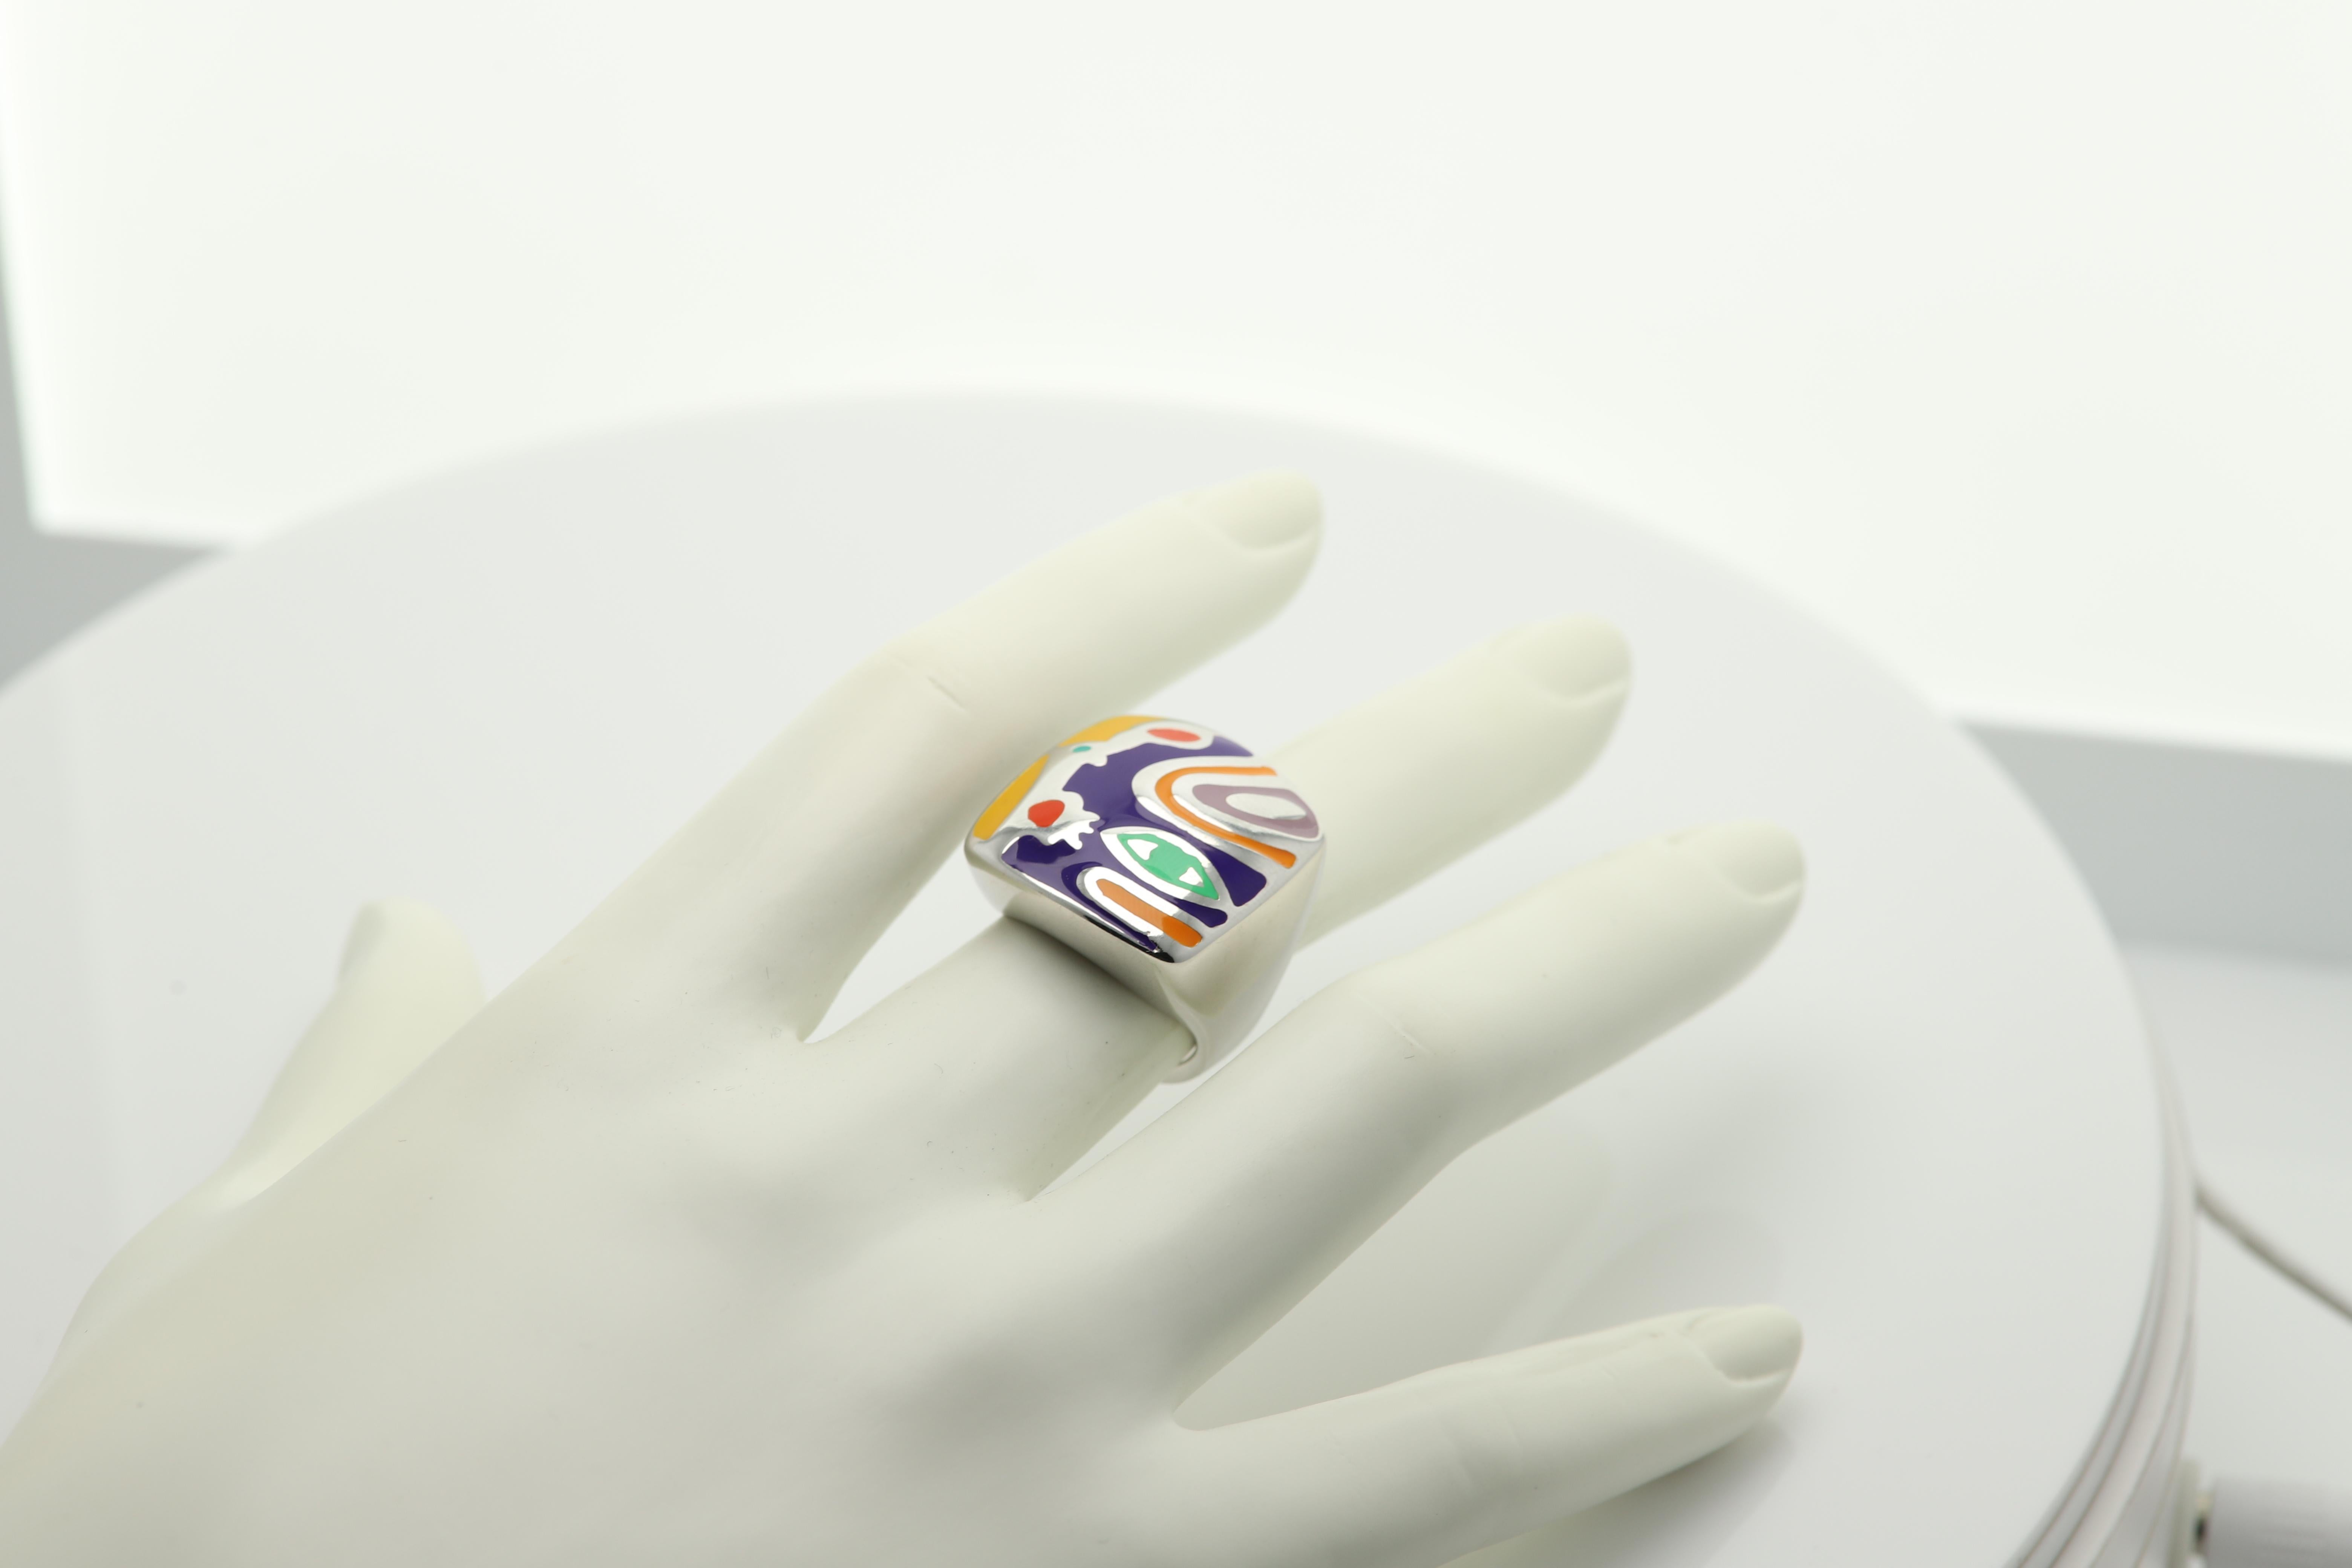 Enamel Artistic Art Ring Inspired by famous world artist sterling silver 925 hand made in Italy finger size 6.5  (NOT RESIZABLE) . Approx design area size 22 x 22mm  Slightly imperfections may exist due to manufacturing process, any tarnish spots